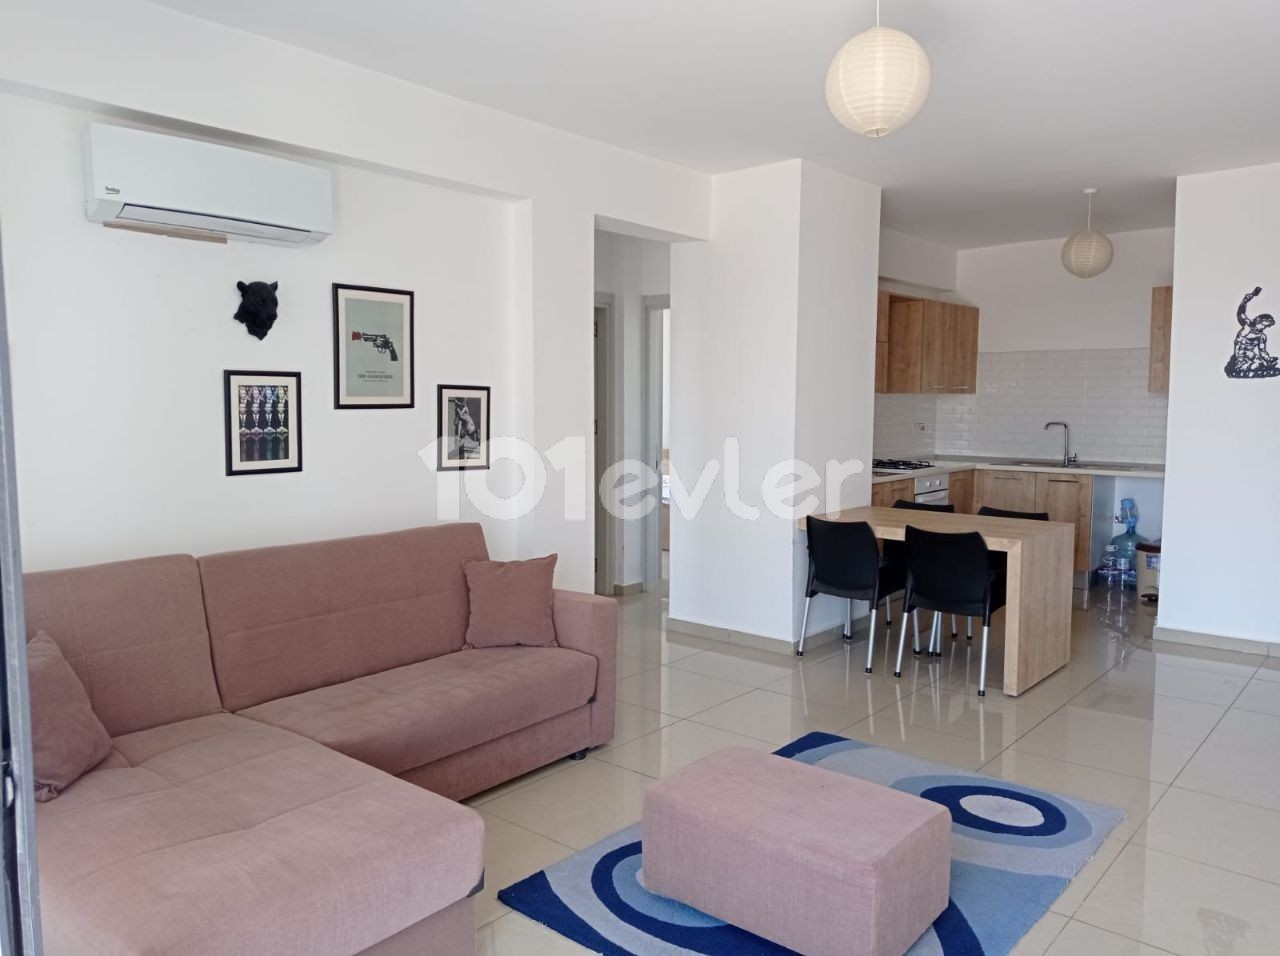 Fully furnished 2+1 flat in a central location in Gönyeli, 5 minutes walking distance to bus stops and markets.